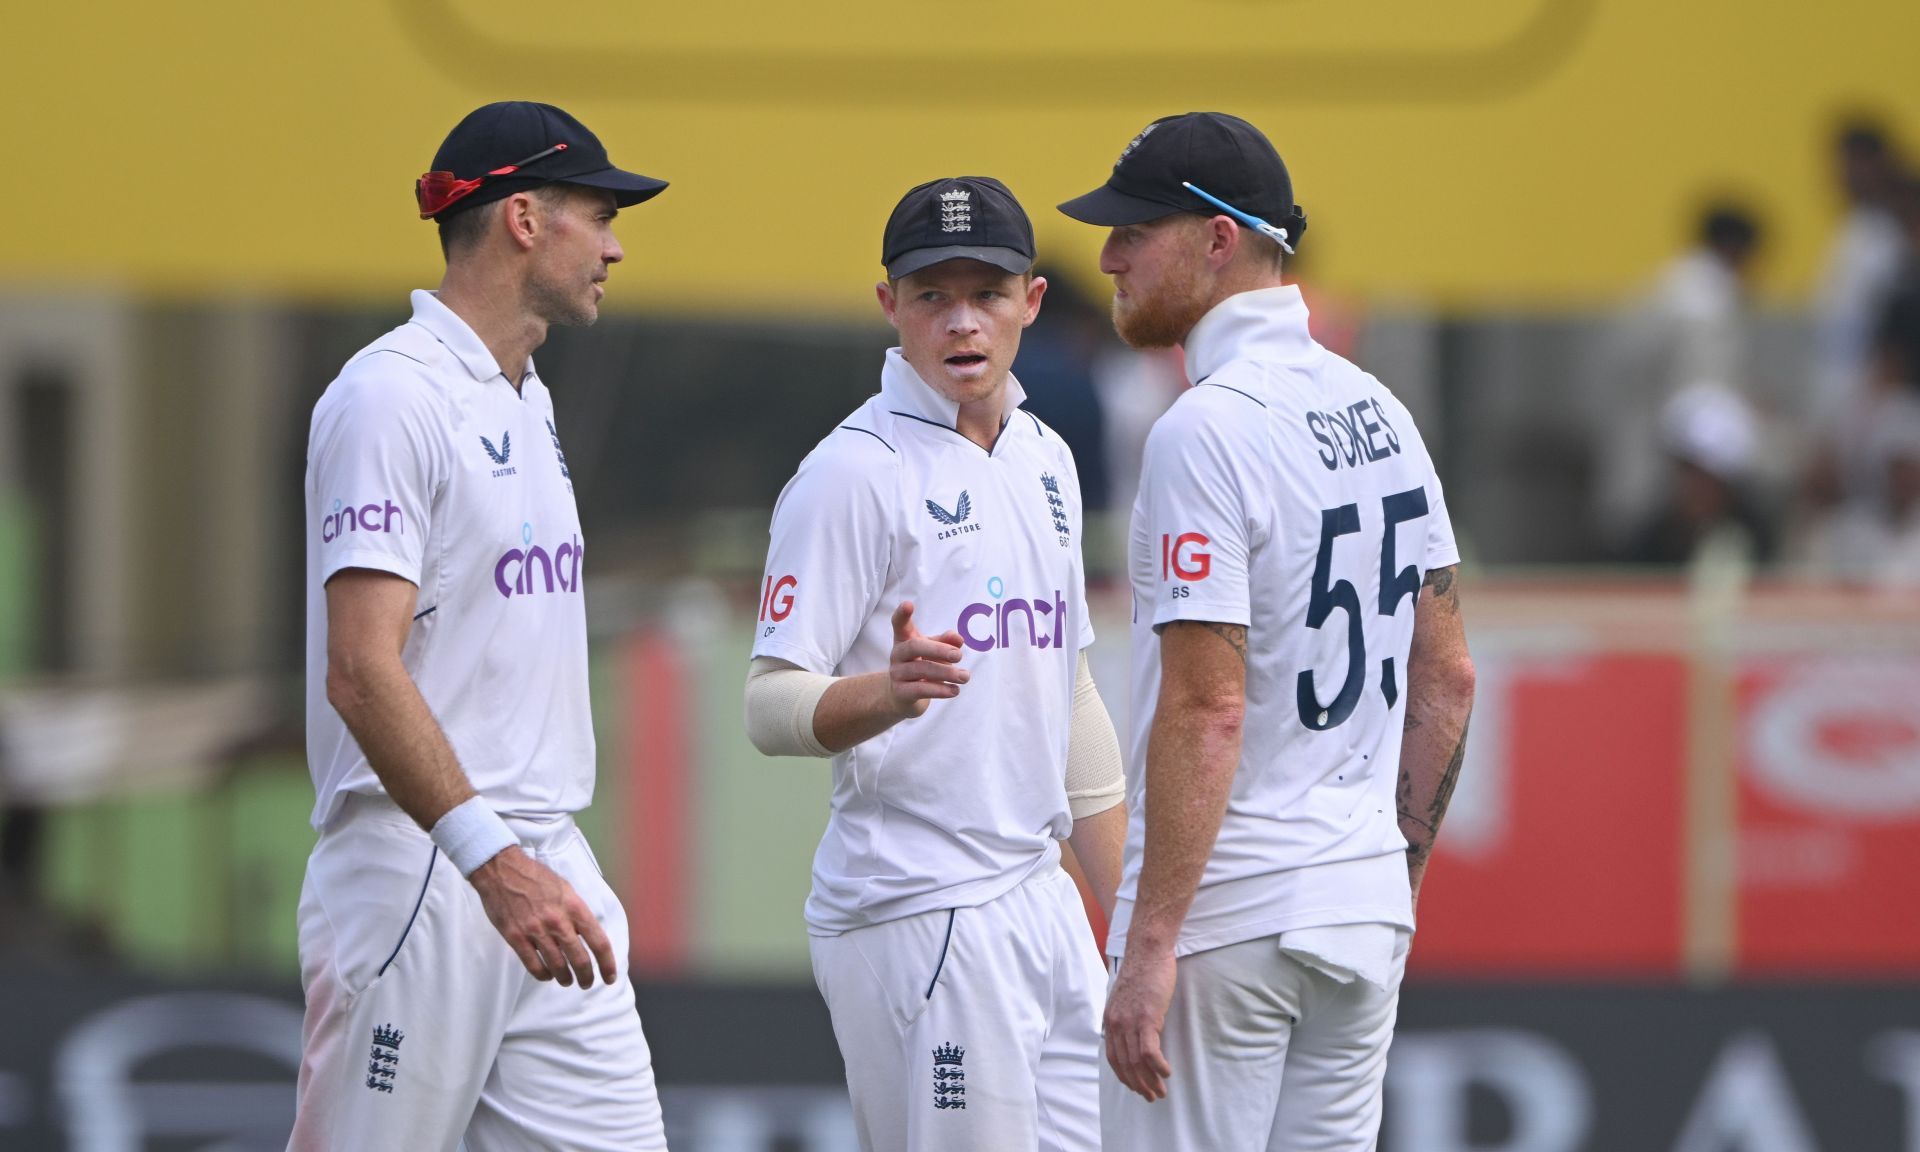 James Anderson, Ollie Pope, and Ben Stokes. (Credits: Getty)